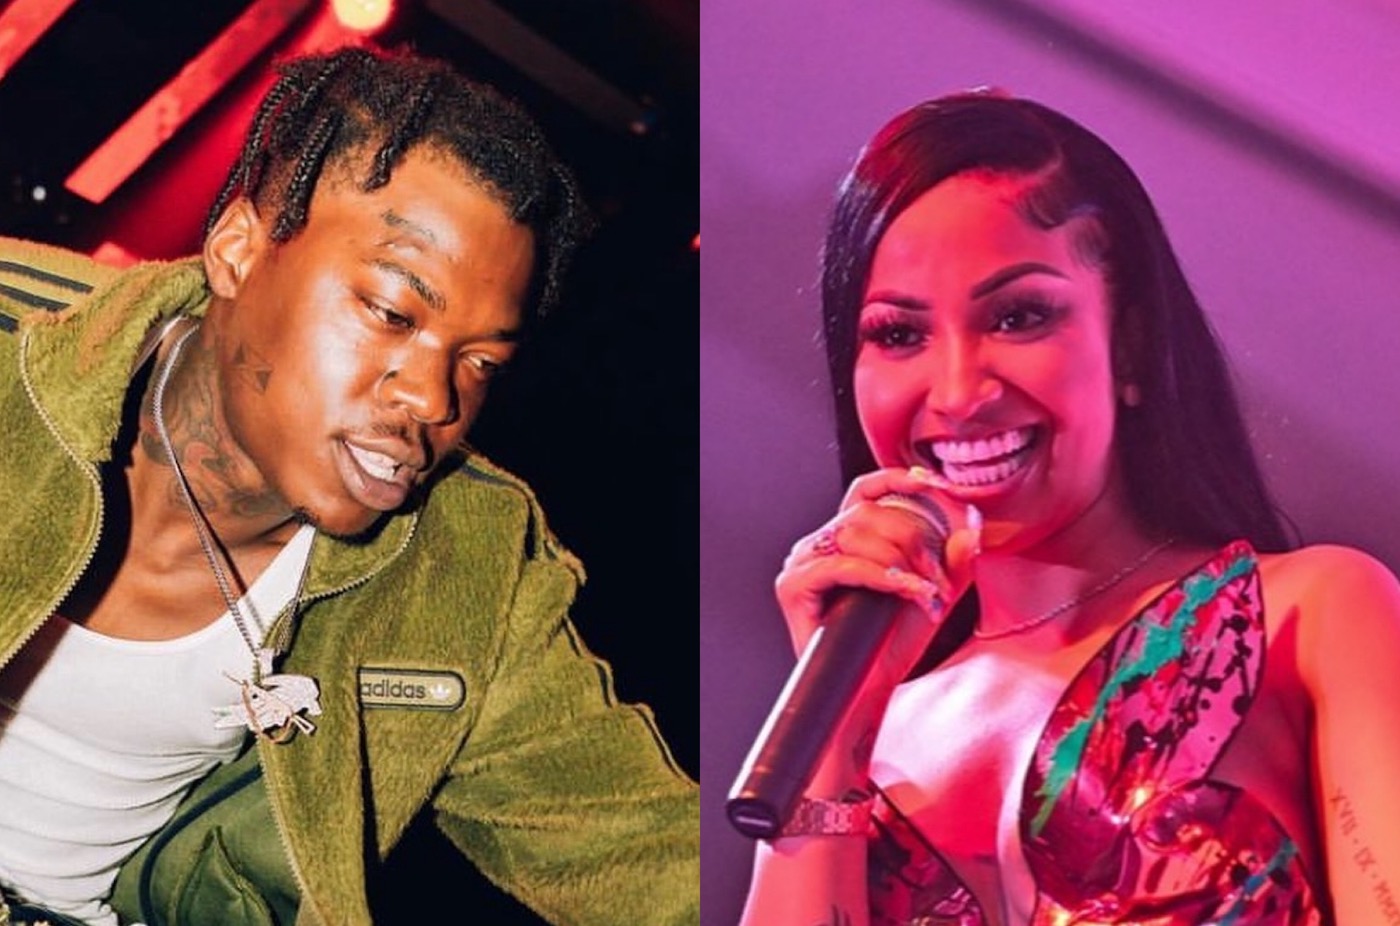 Fans Chant Boo During Shenseea & Skillibeng Sets At Kingston Fest Over Sound Problems